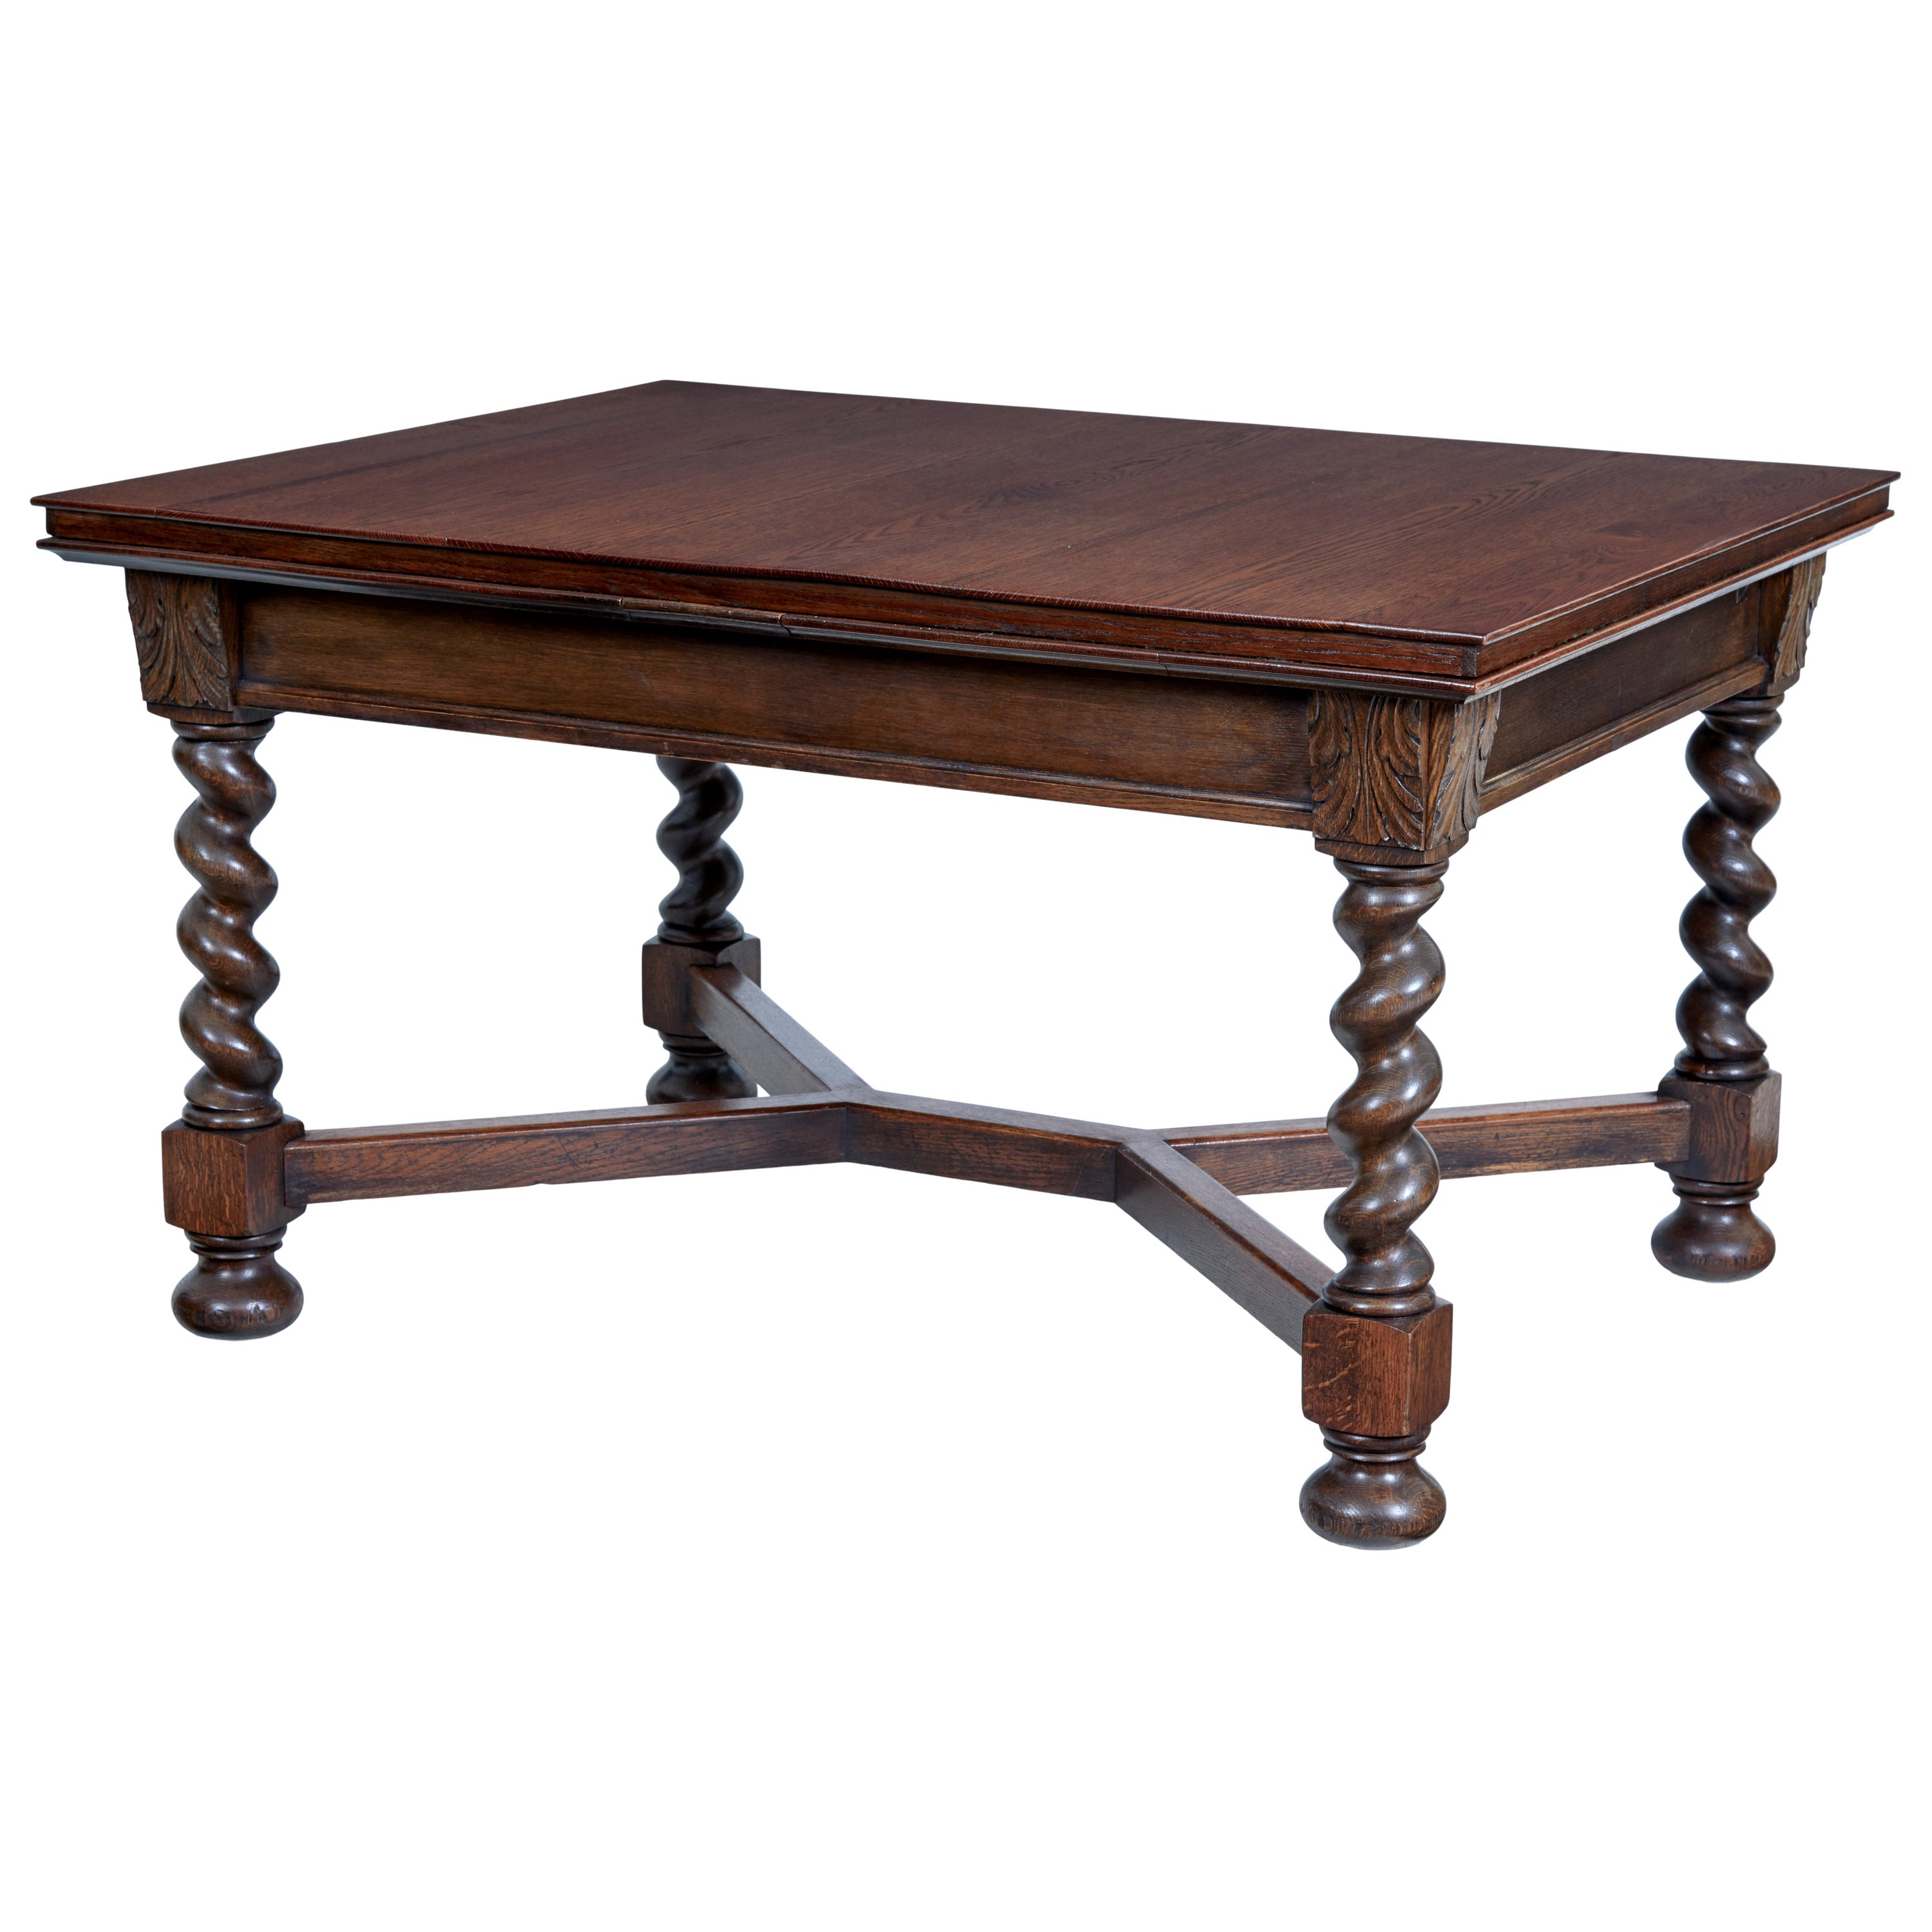 Early 20th Century Baroque Revival Oak Extending Dining Table